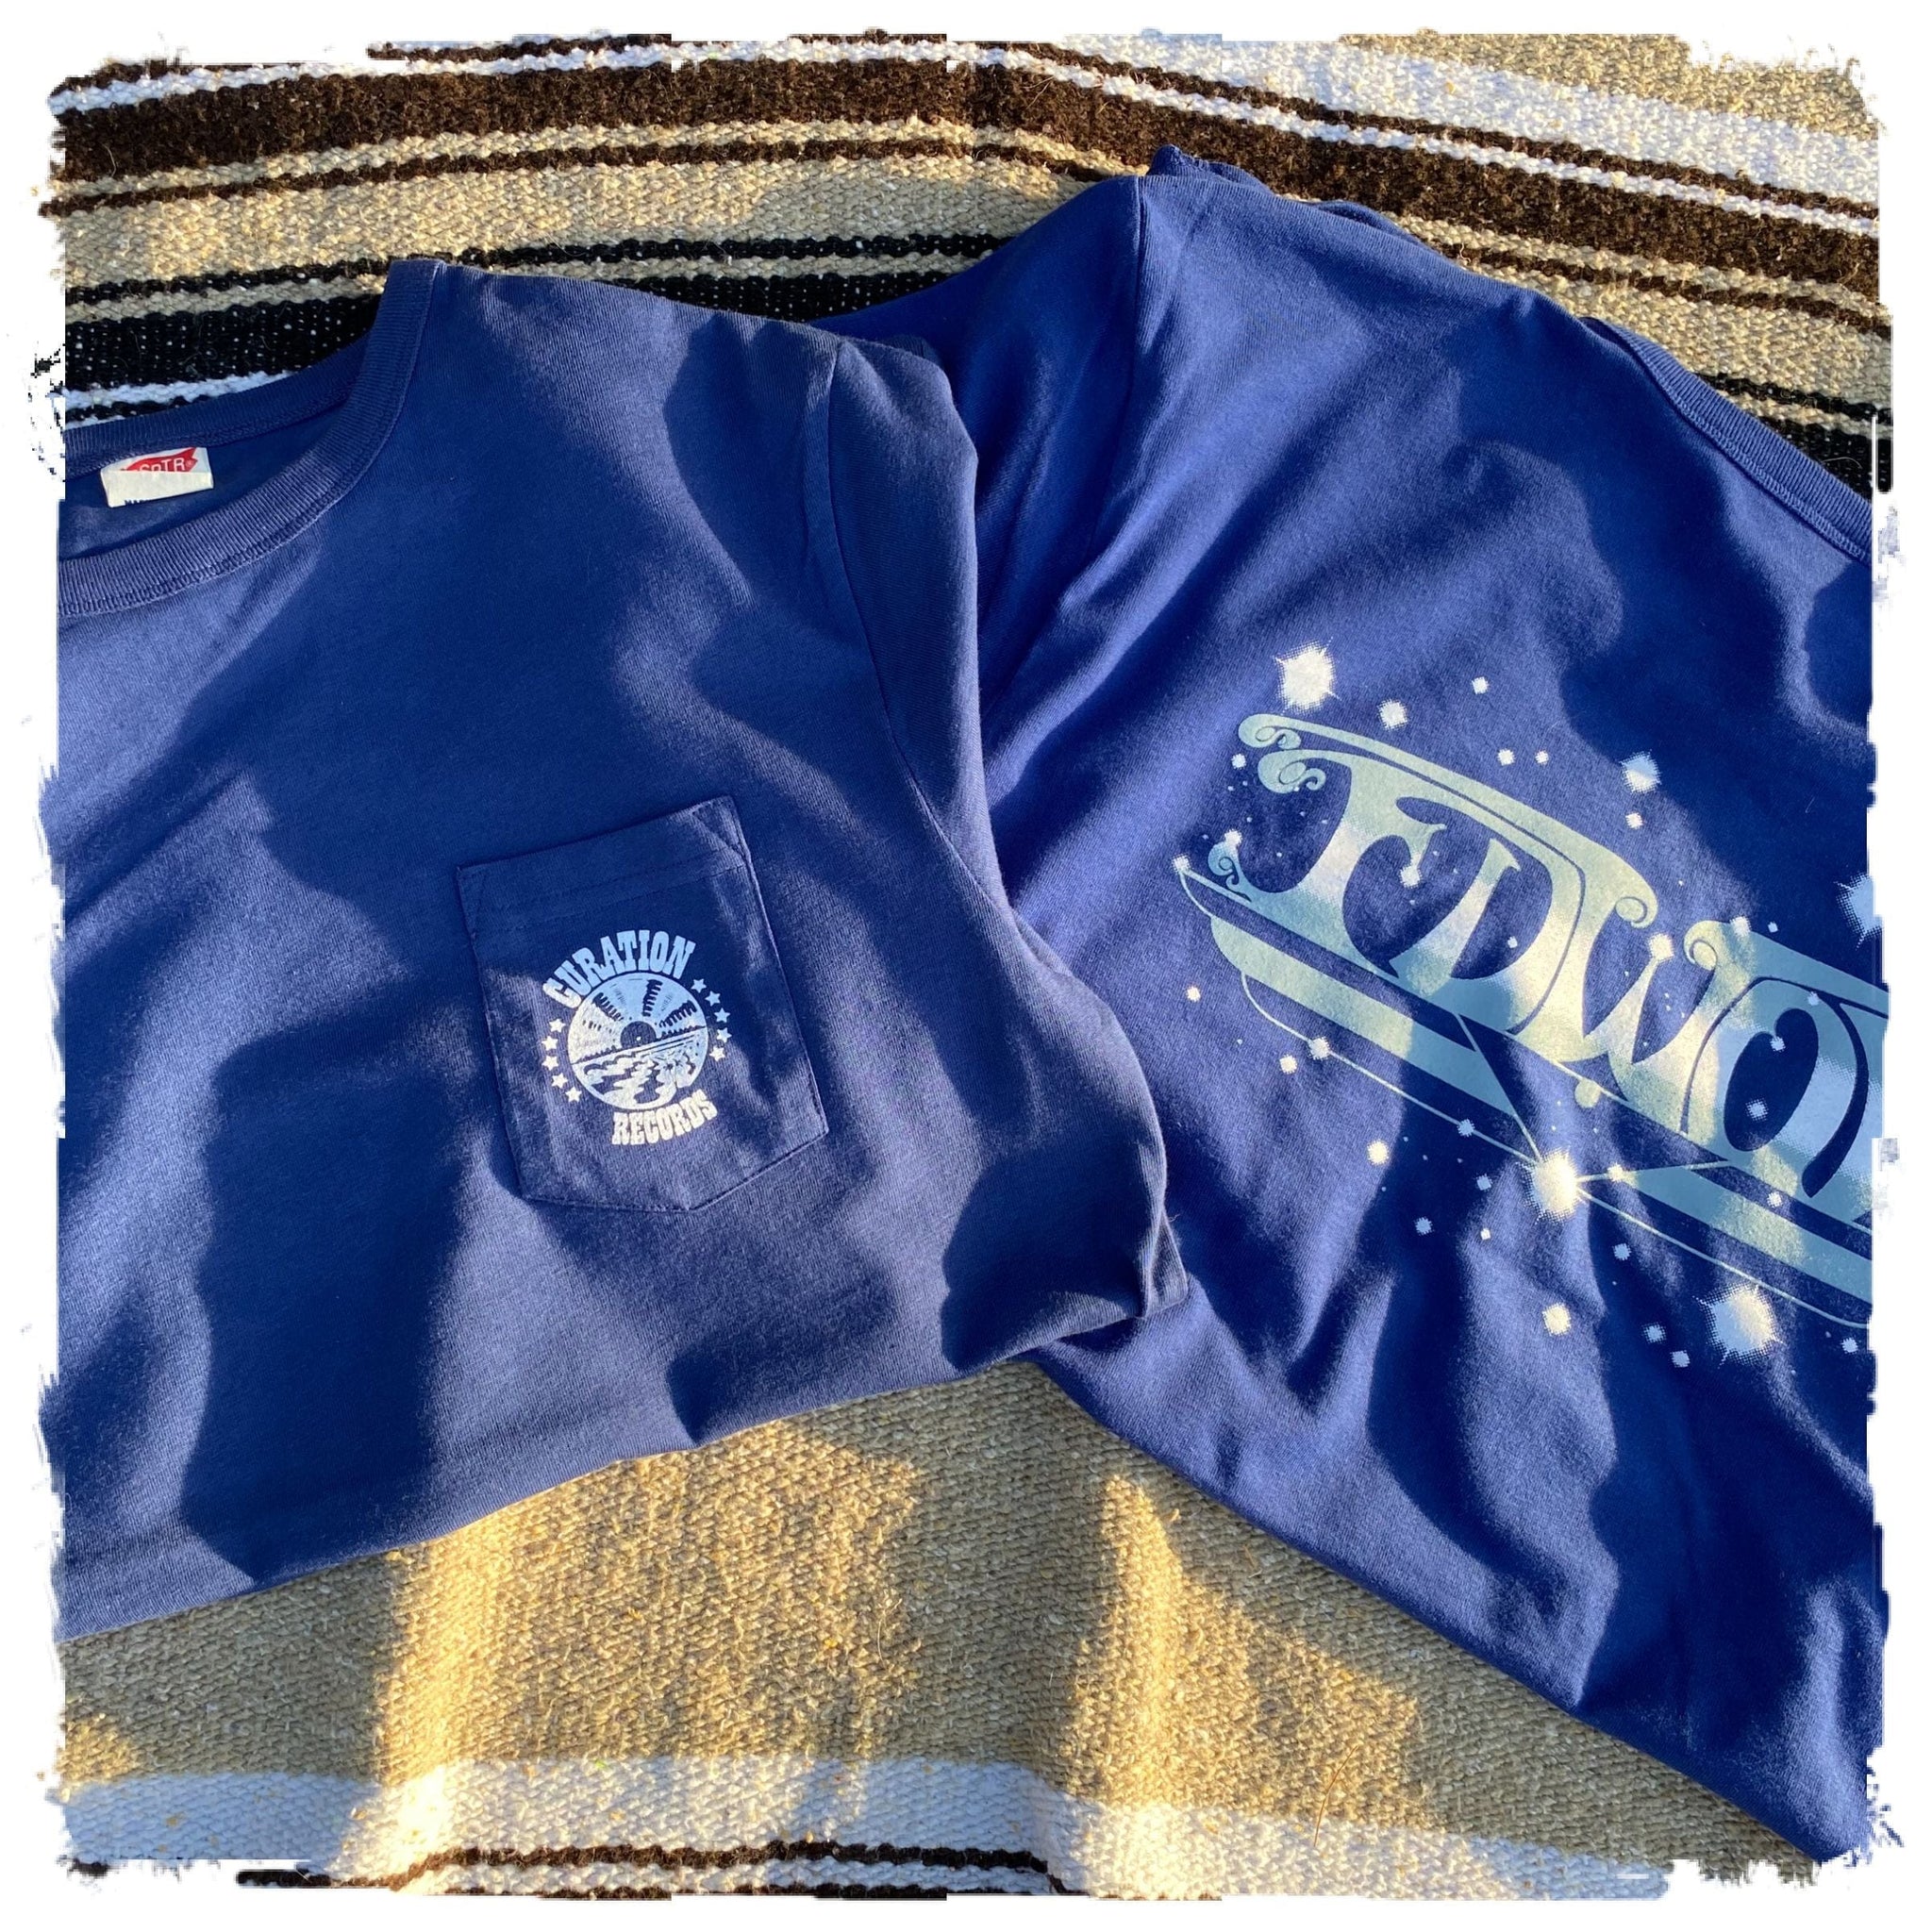 FDWOW Curation Records Pocket Tee (6594552594514)